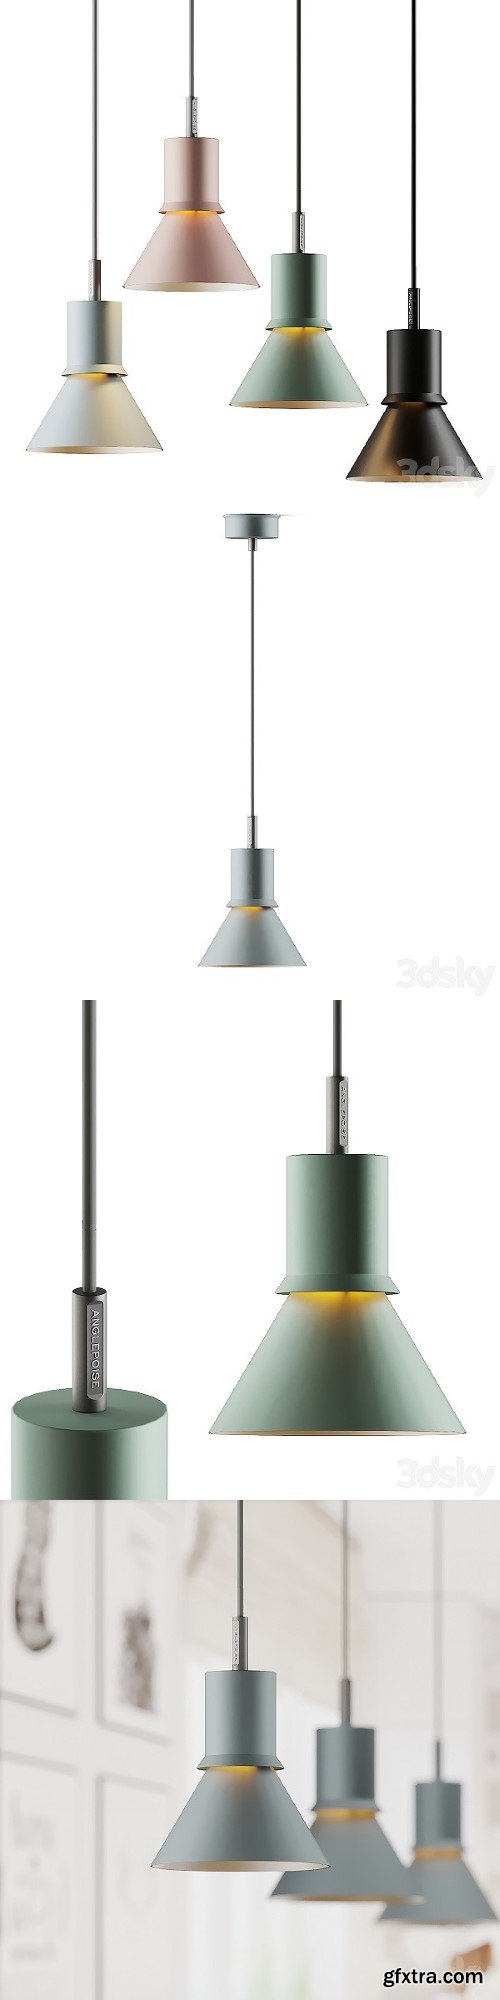 Type 80 Pendant From Anglepoise